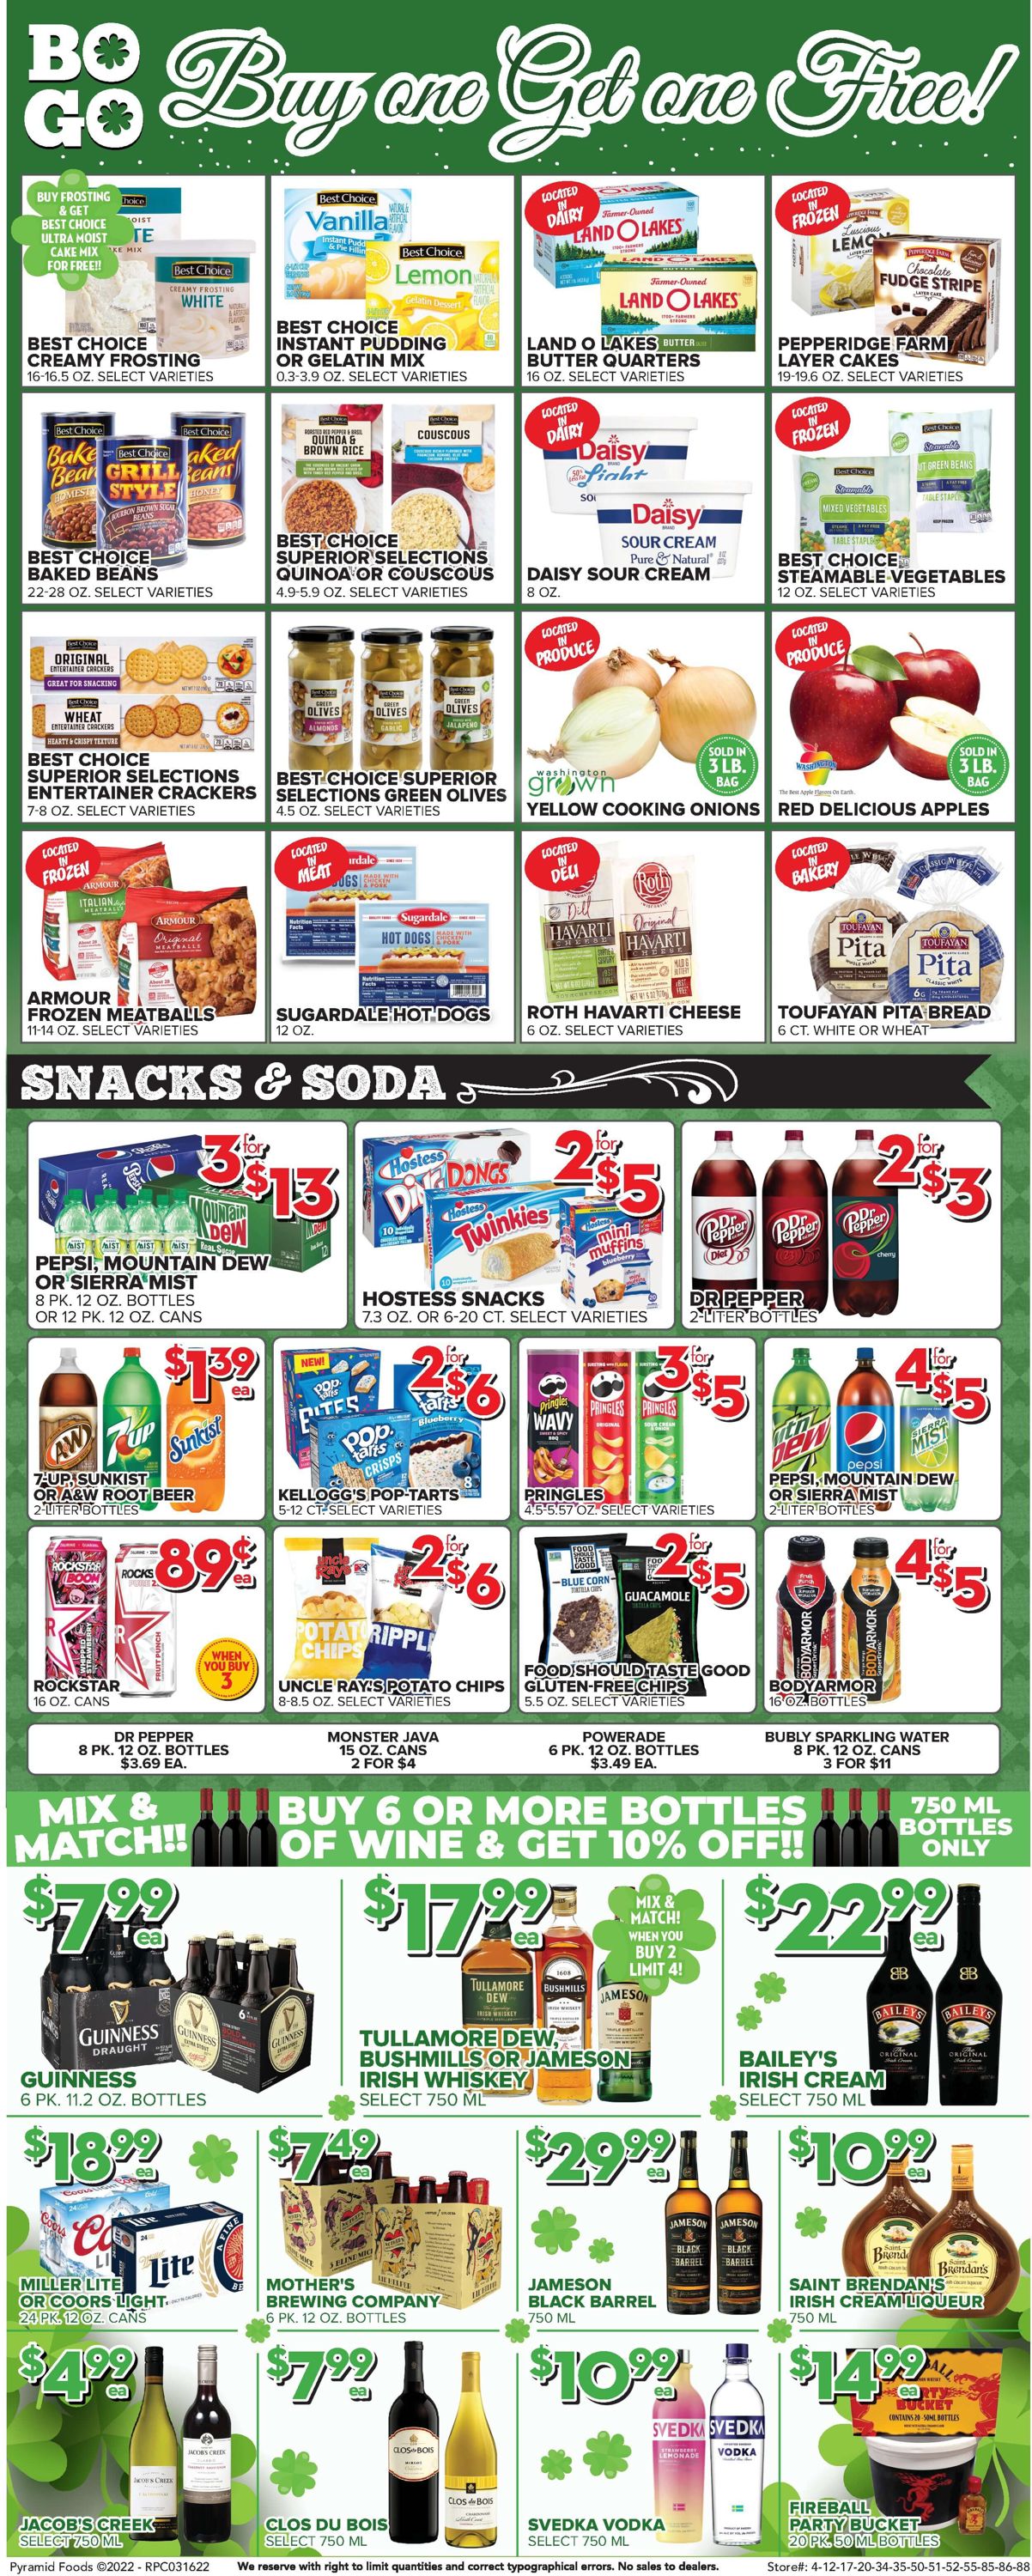 Price Cutter Weekly Ad Circular - valid 03/16-03/22/2022 (Page 6)